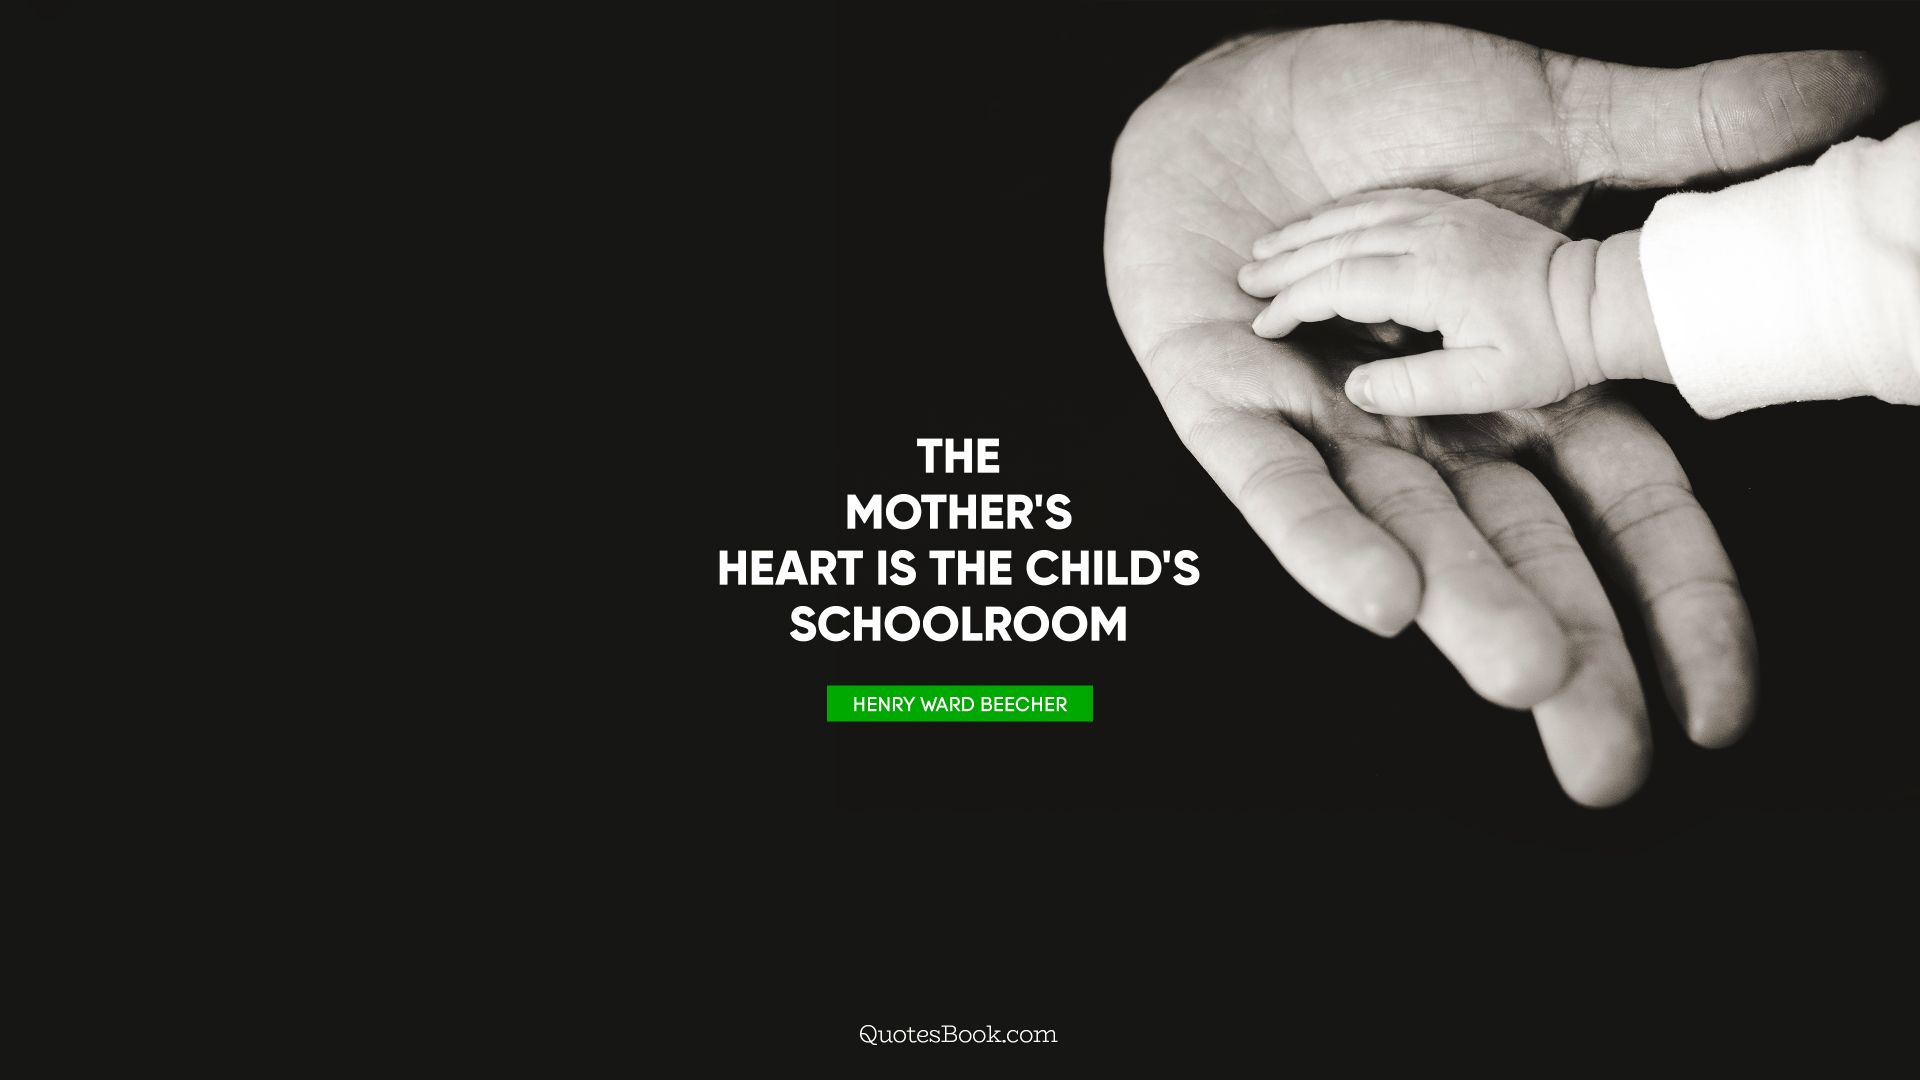 The mother's heart is the child's schoolroom. - Quote by Henry Ward Beecher